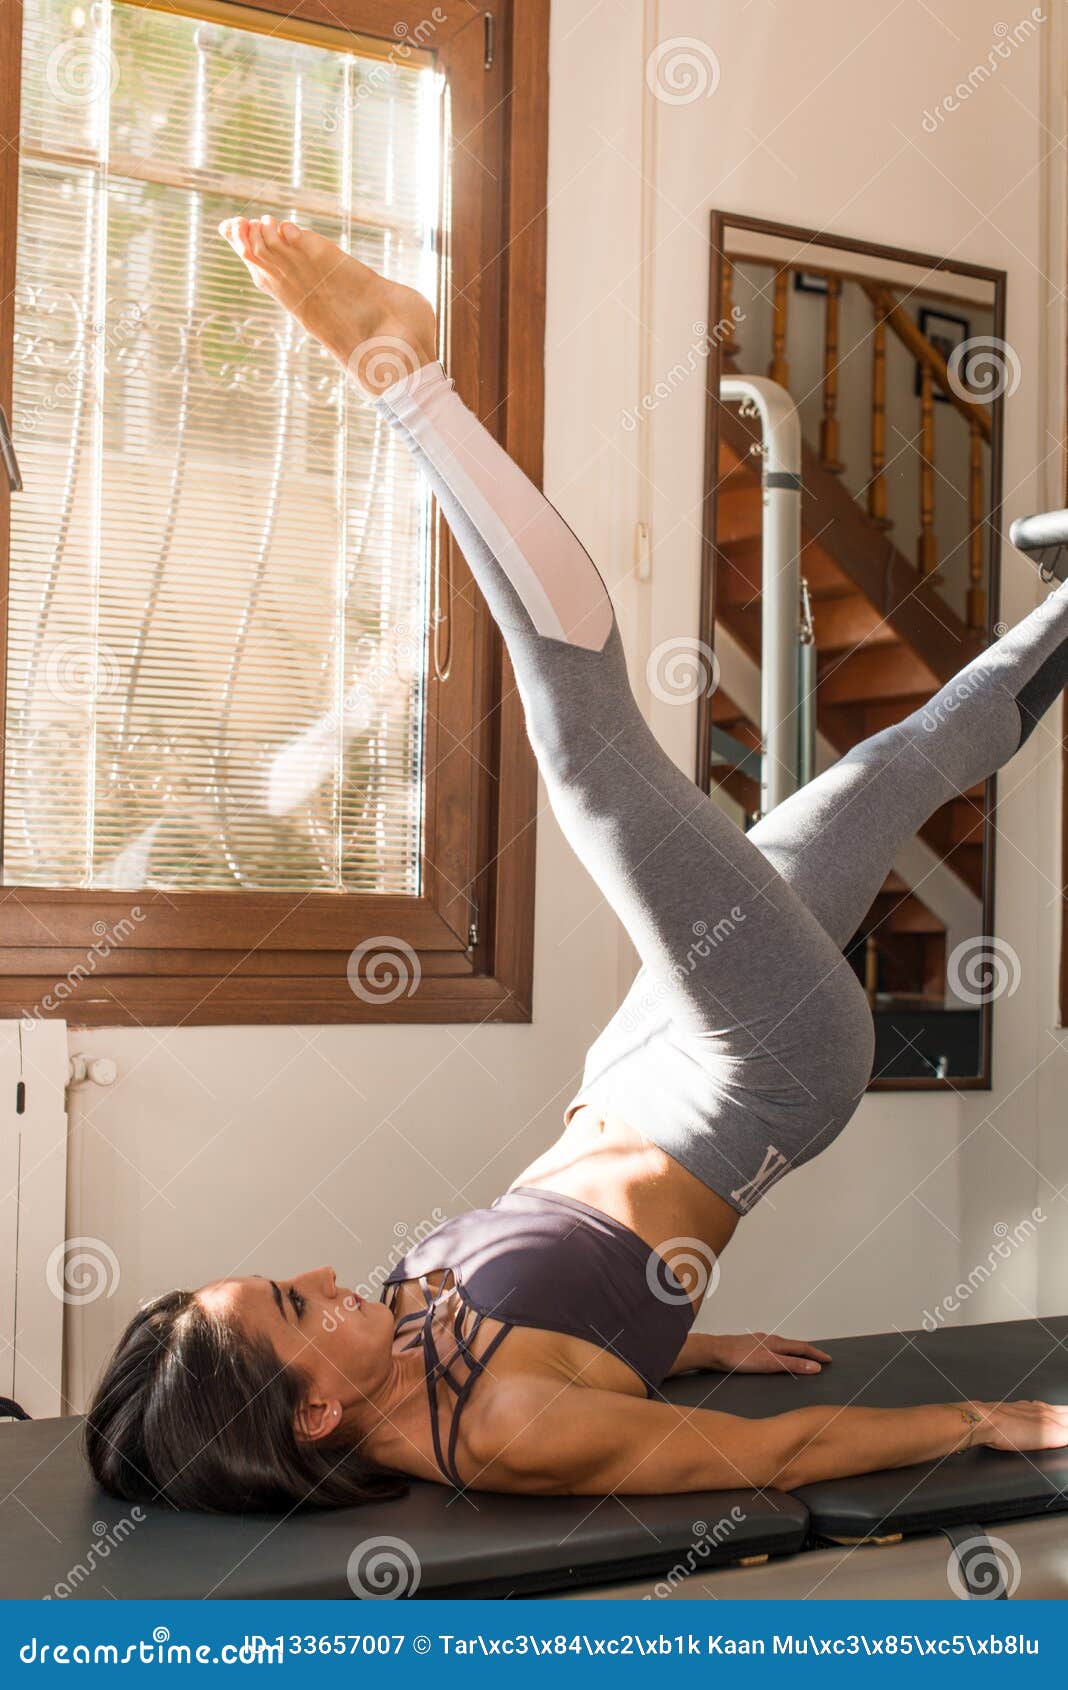 https://thumbs.dreamstime.com/z/young-woman-exercising-pilates-reformer-pilates-instructor-cadillac-reformer-workout-peak-pilates-pilates-trainer-133657007.jpg